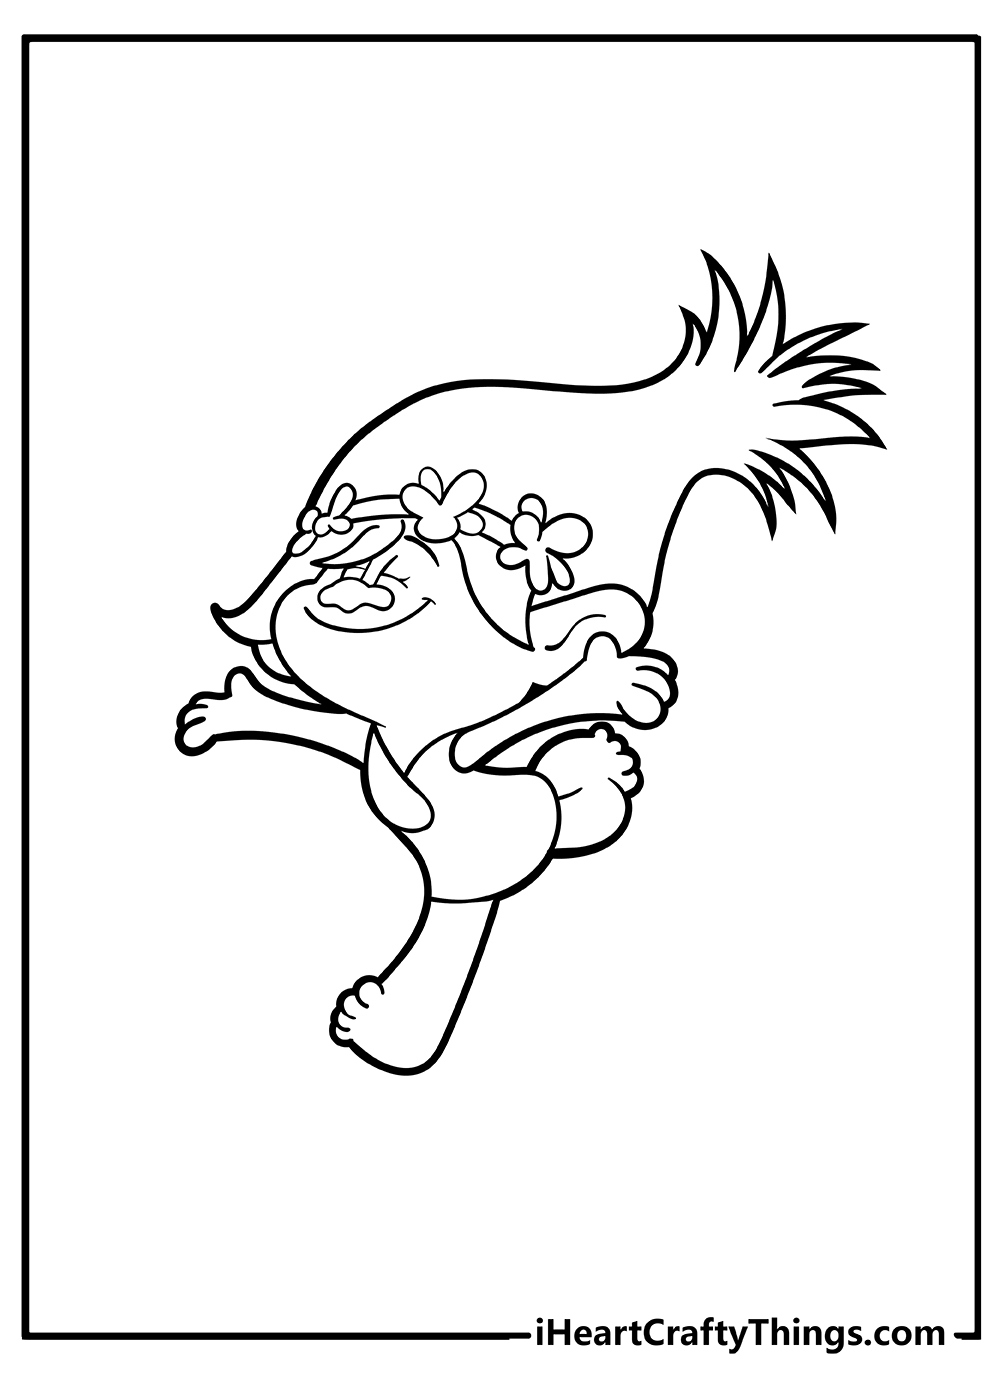 Troll Coloring Pages free pdf download